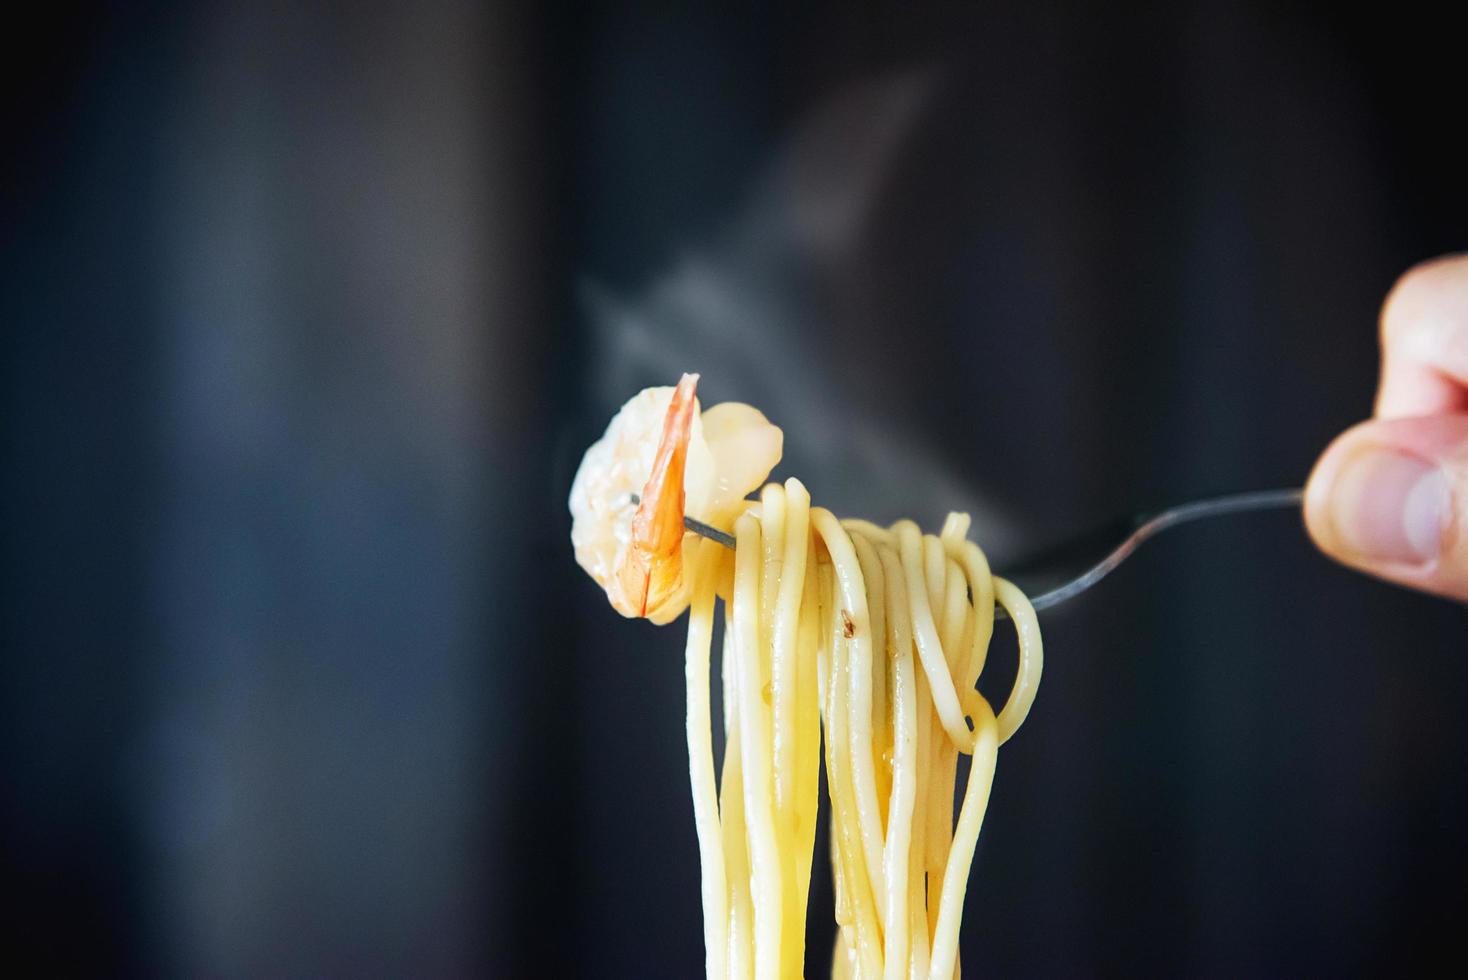 Hot and spicy spaghetti with shrimp and fork over black background - Italian food with people concept photo